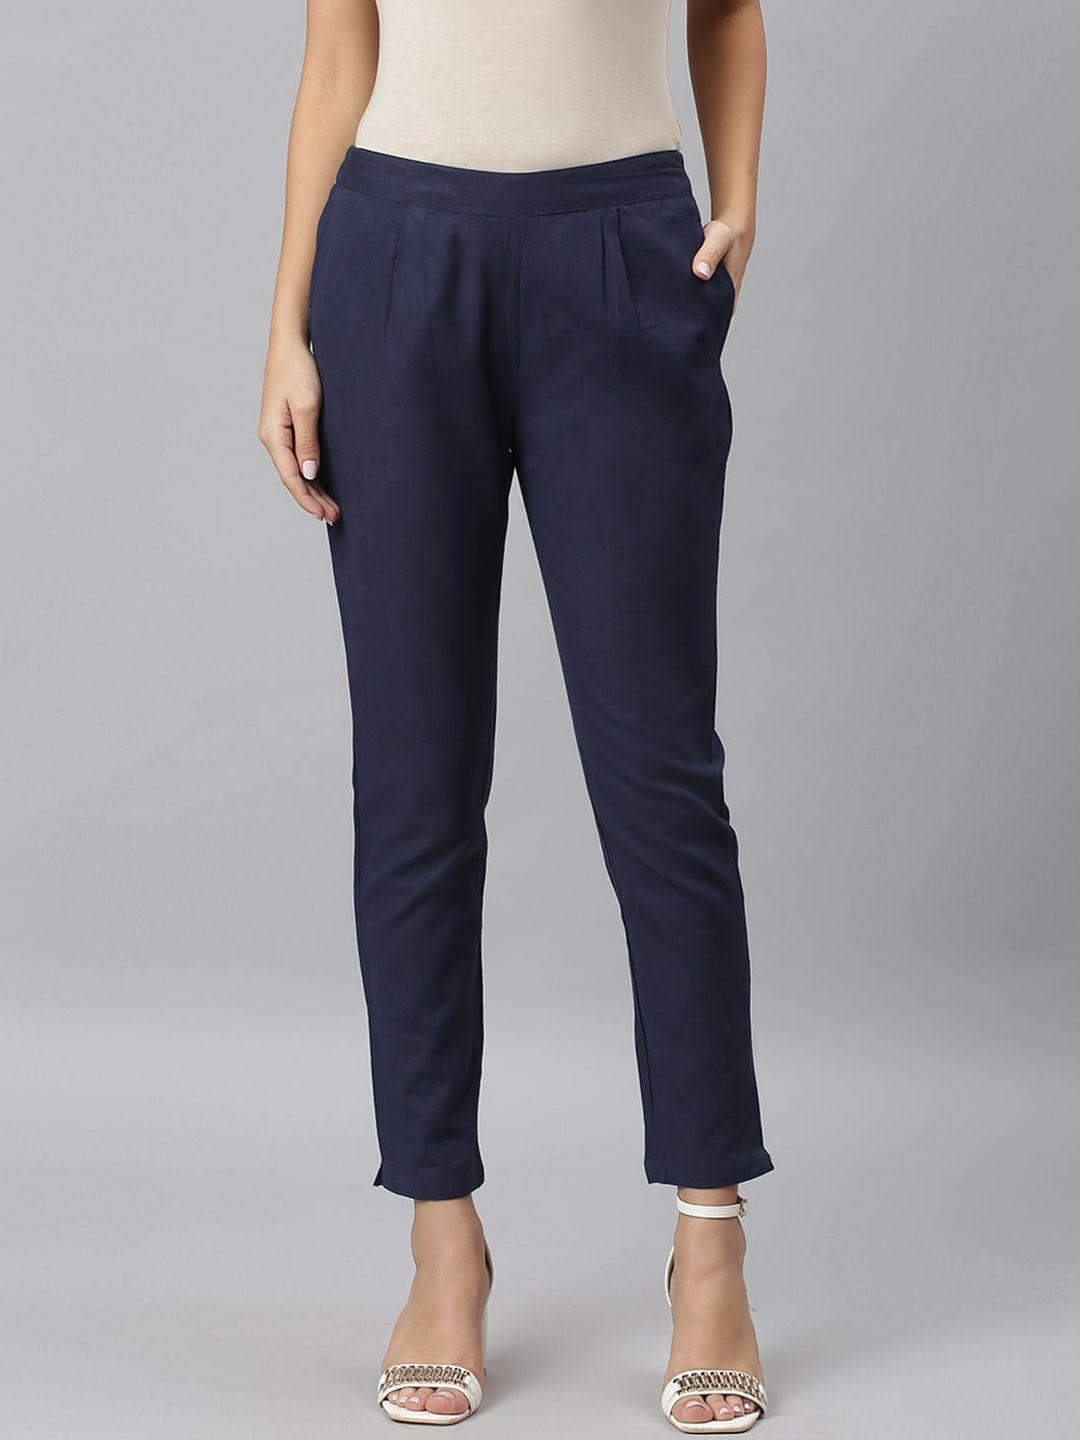 jaipur attire women navy blue solid pleated cigarette trousers